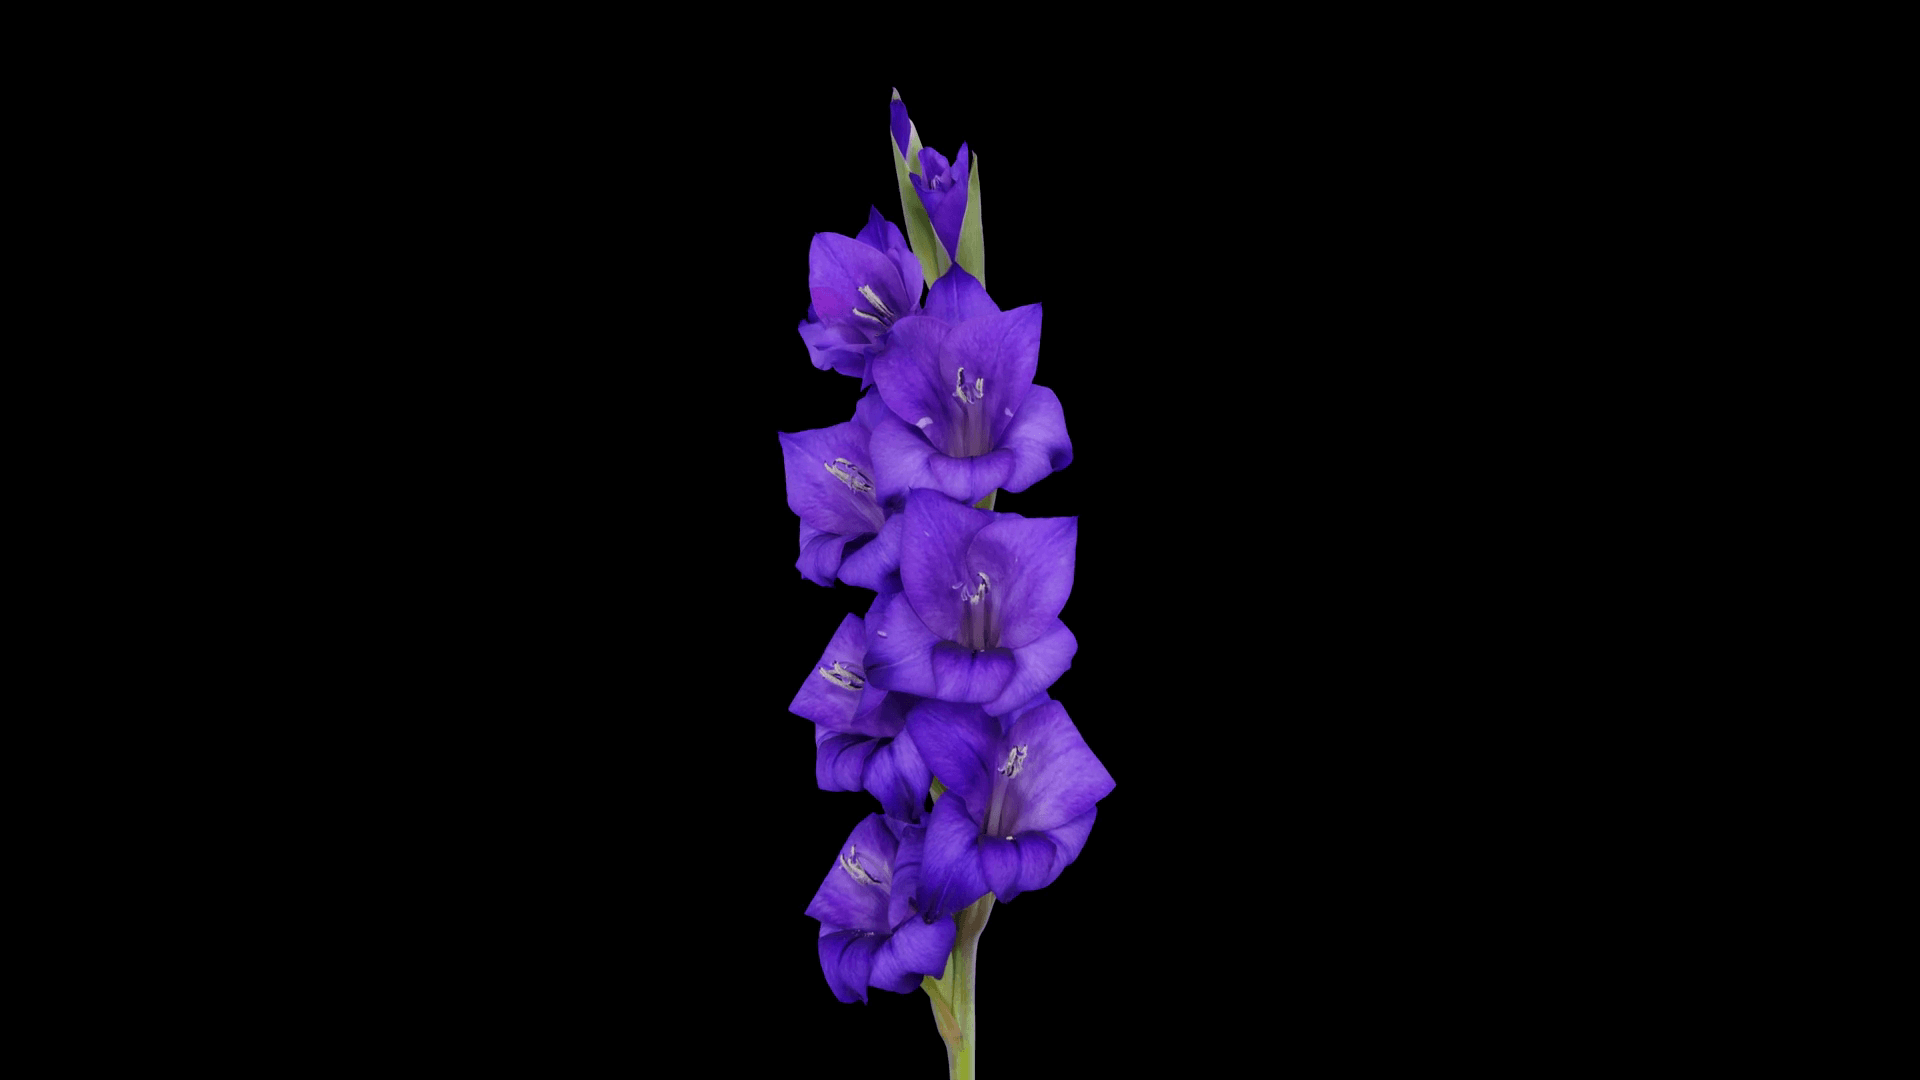 Time Lapse Of Opening Purple Gladiolus Flower 9a4 In 4K PNG+ Format With ALPHA Transparency Channel Isolated On Black Background